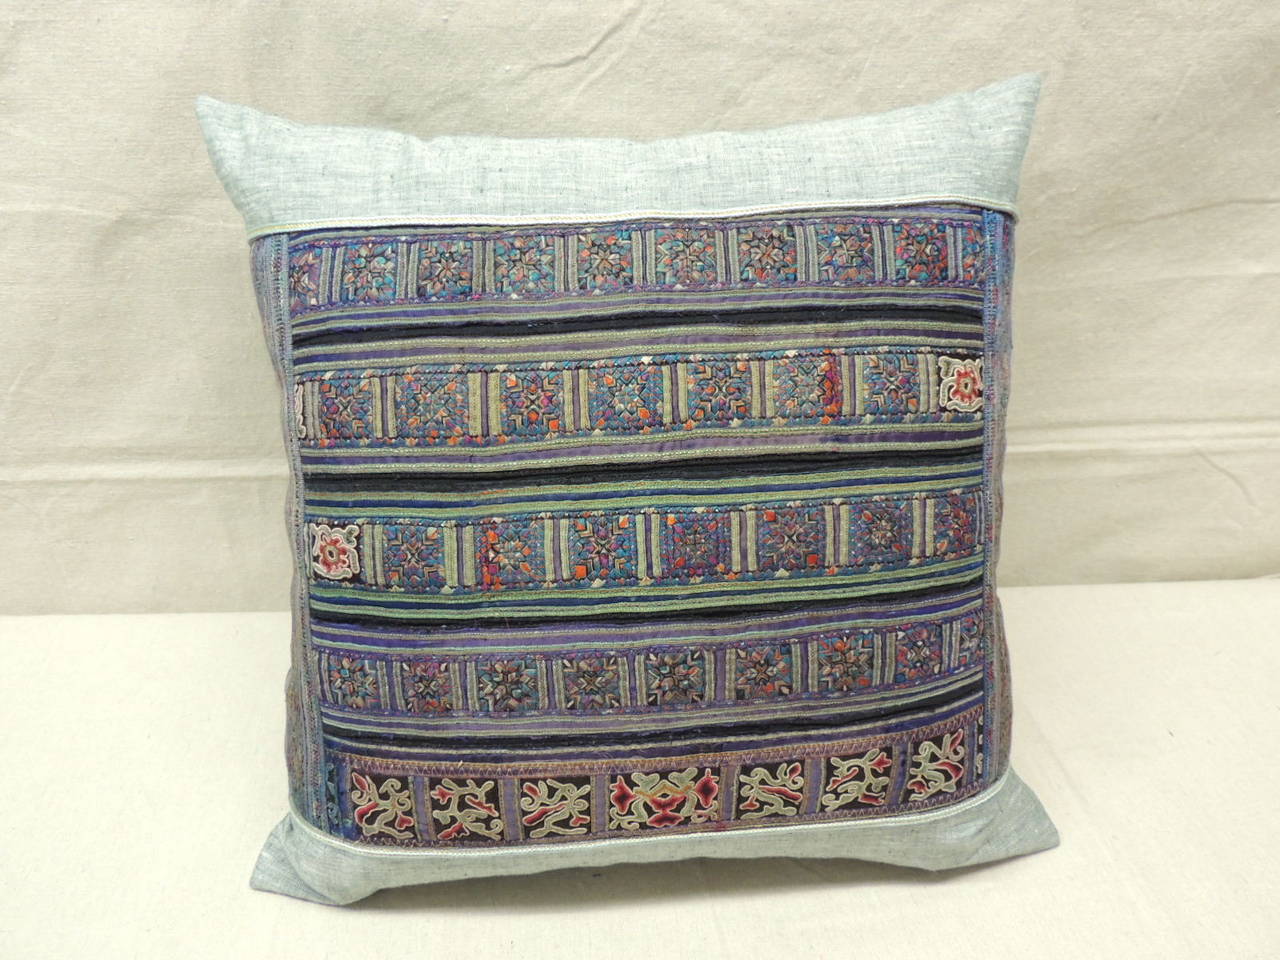 Antique Textiles Galleries:
Vintage Silk Stripe Embroidery Miao Decorative Pillow
Large pillow has a strike blue linen frame and backing.  This throw pillow depicts tribal embroidery design typical of the tribe hills in Asia. Decorative pillow